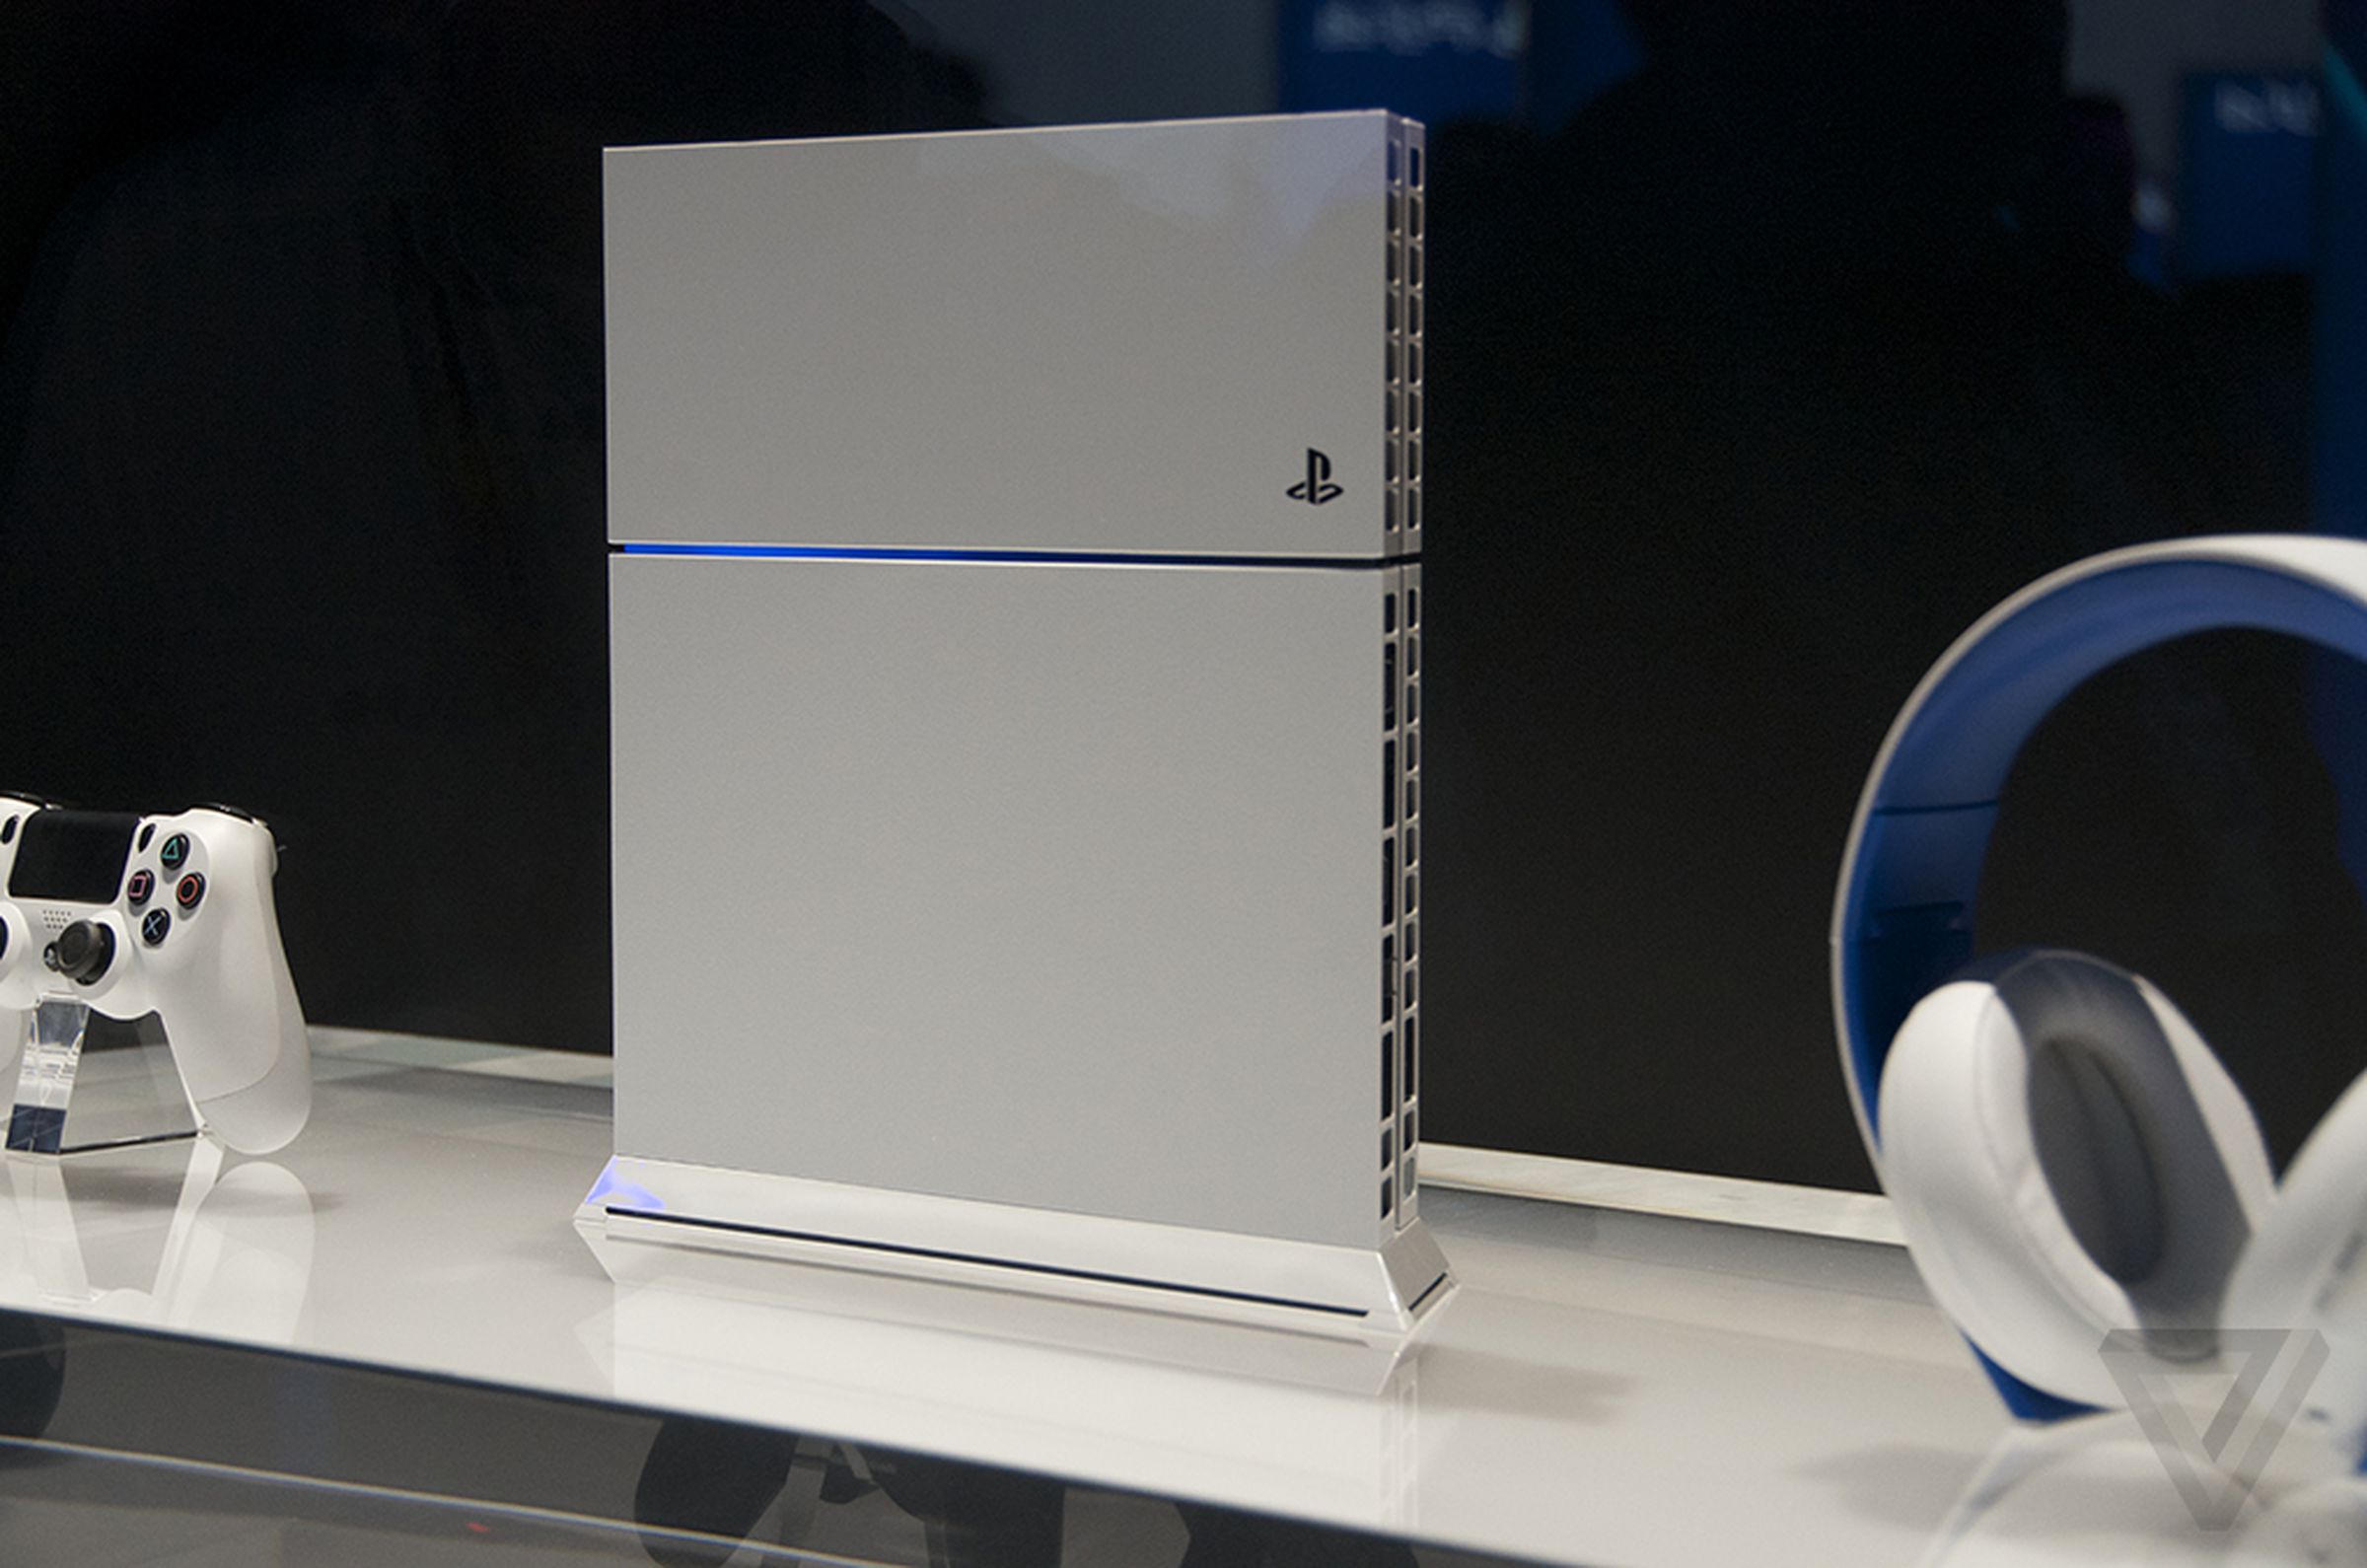 White Sony PlayStation 4 images